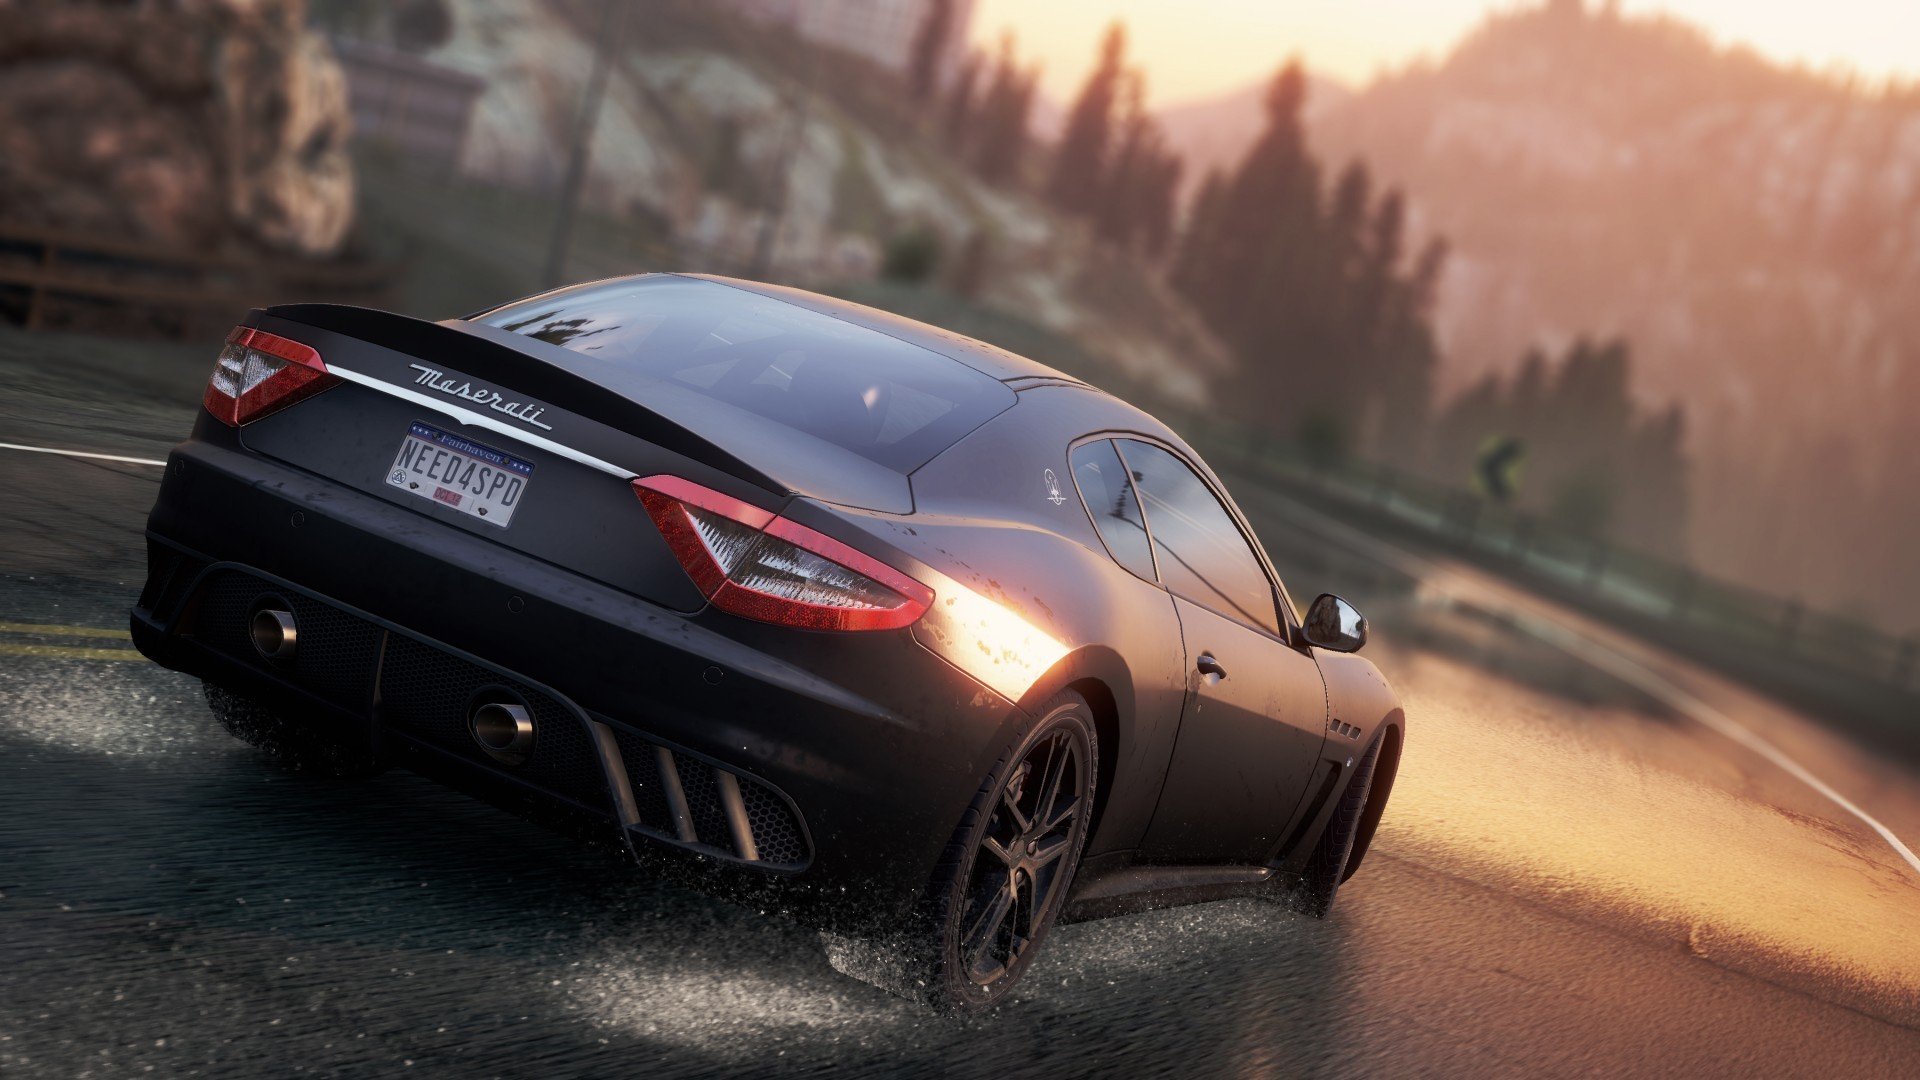 Best Need For Speed: Most Wanted wallpaper ID:137087 for High Resolution full hd 1920x1080 desktop